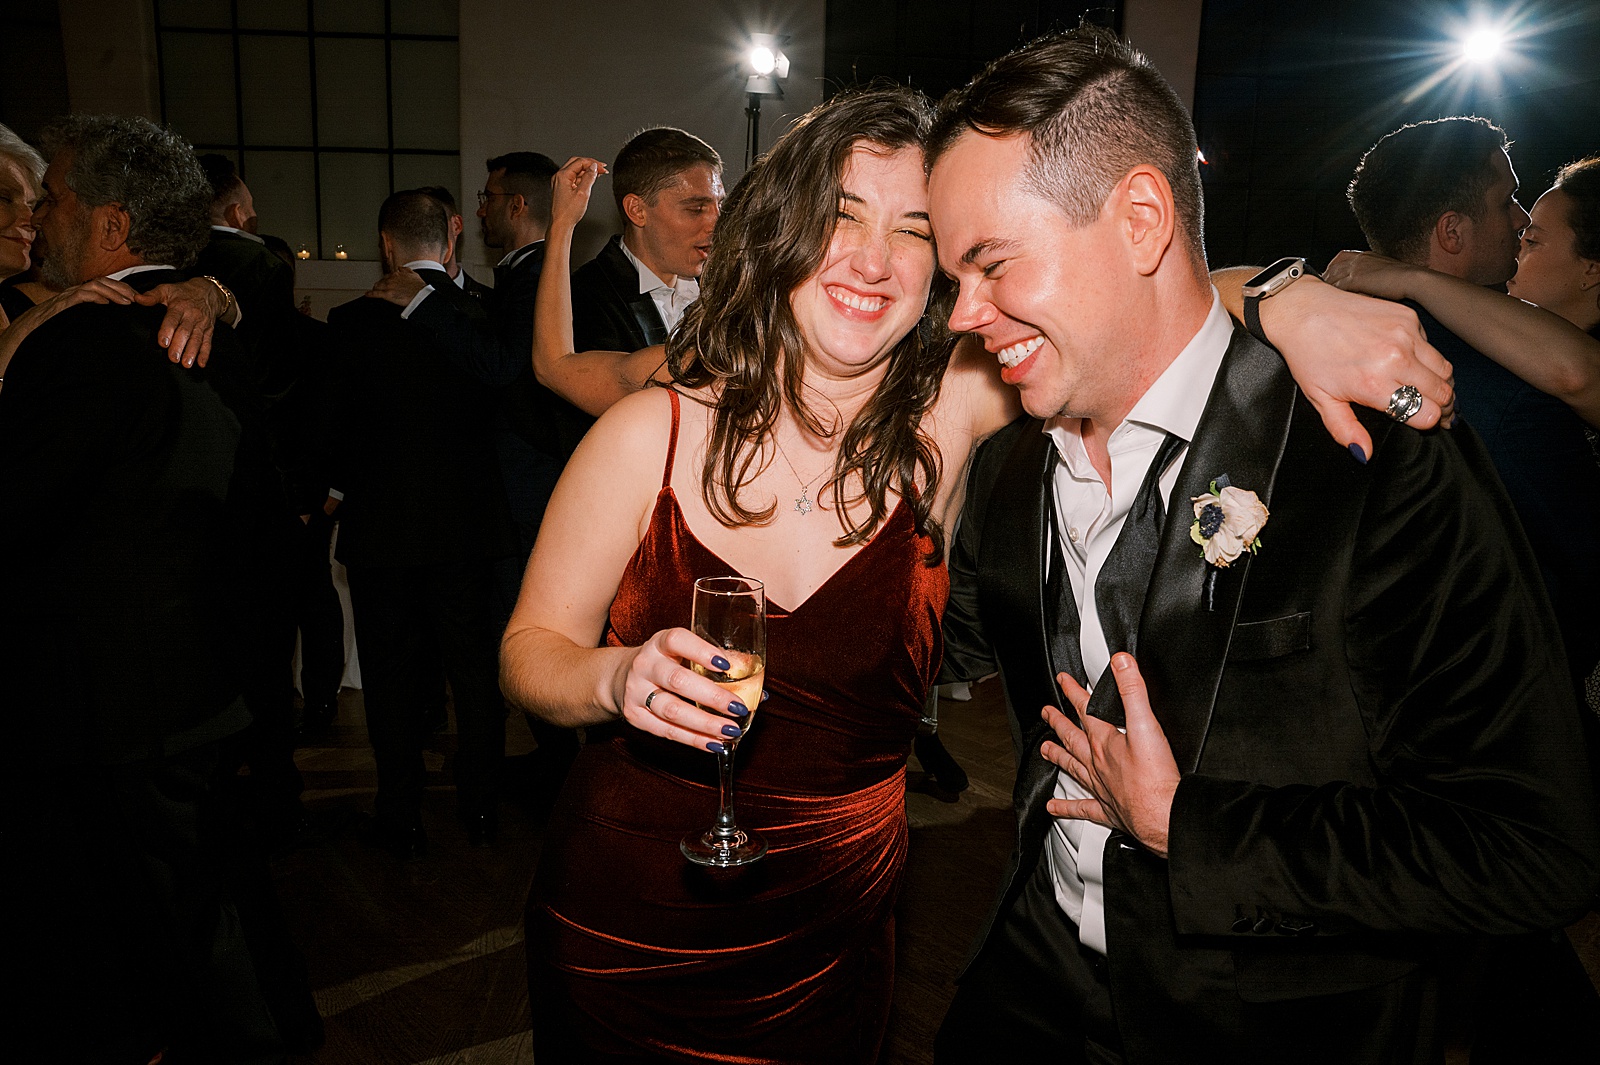 A man and woman lean on each other laughing on the edge of the dance floor of a wedding reception.